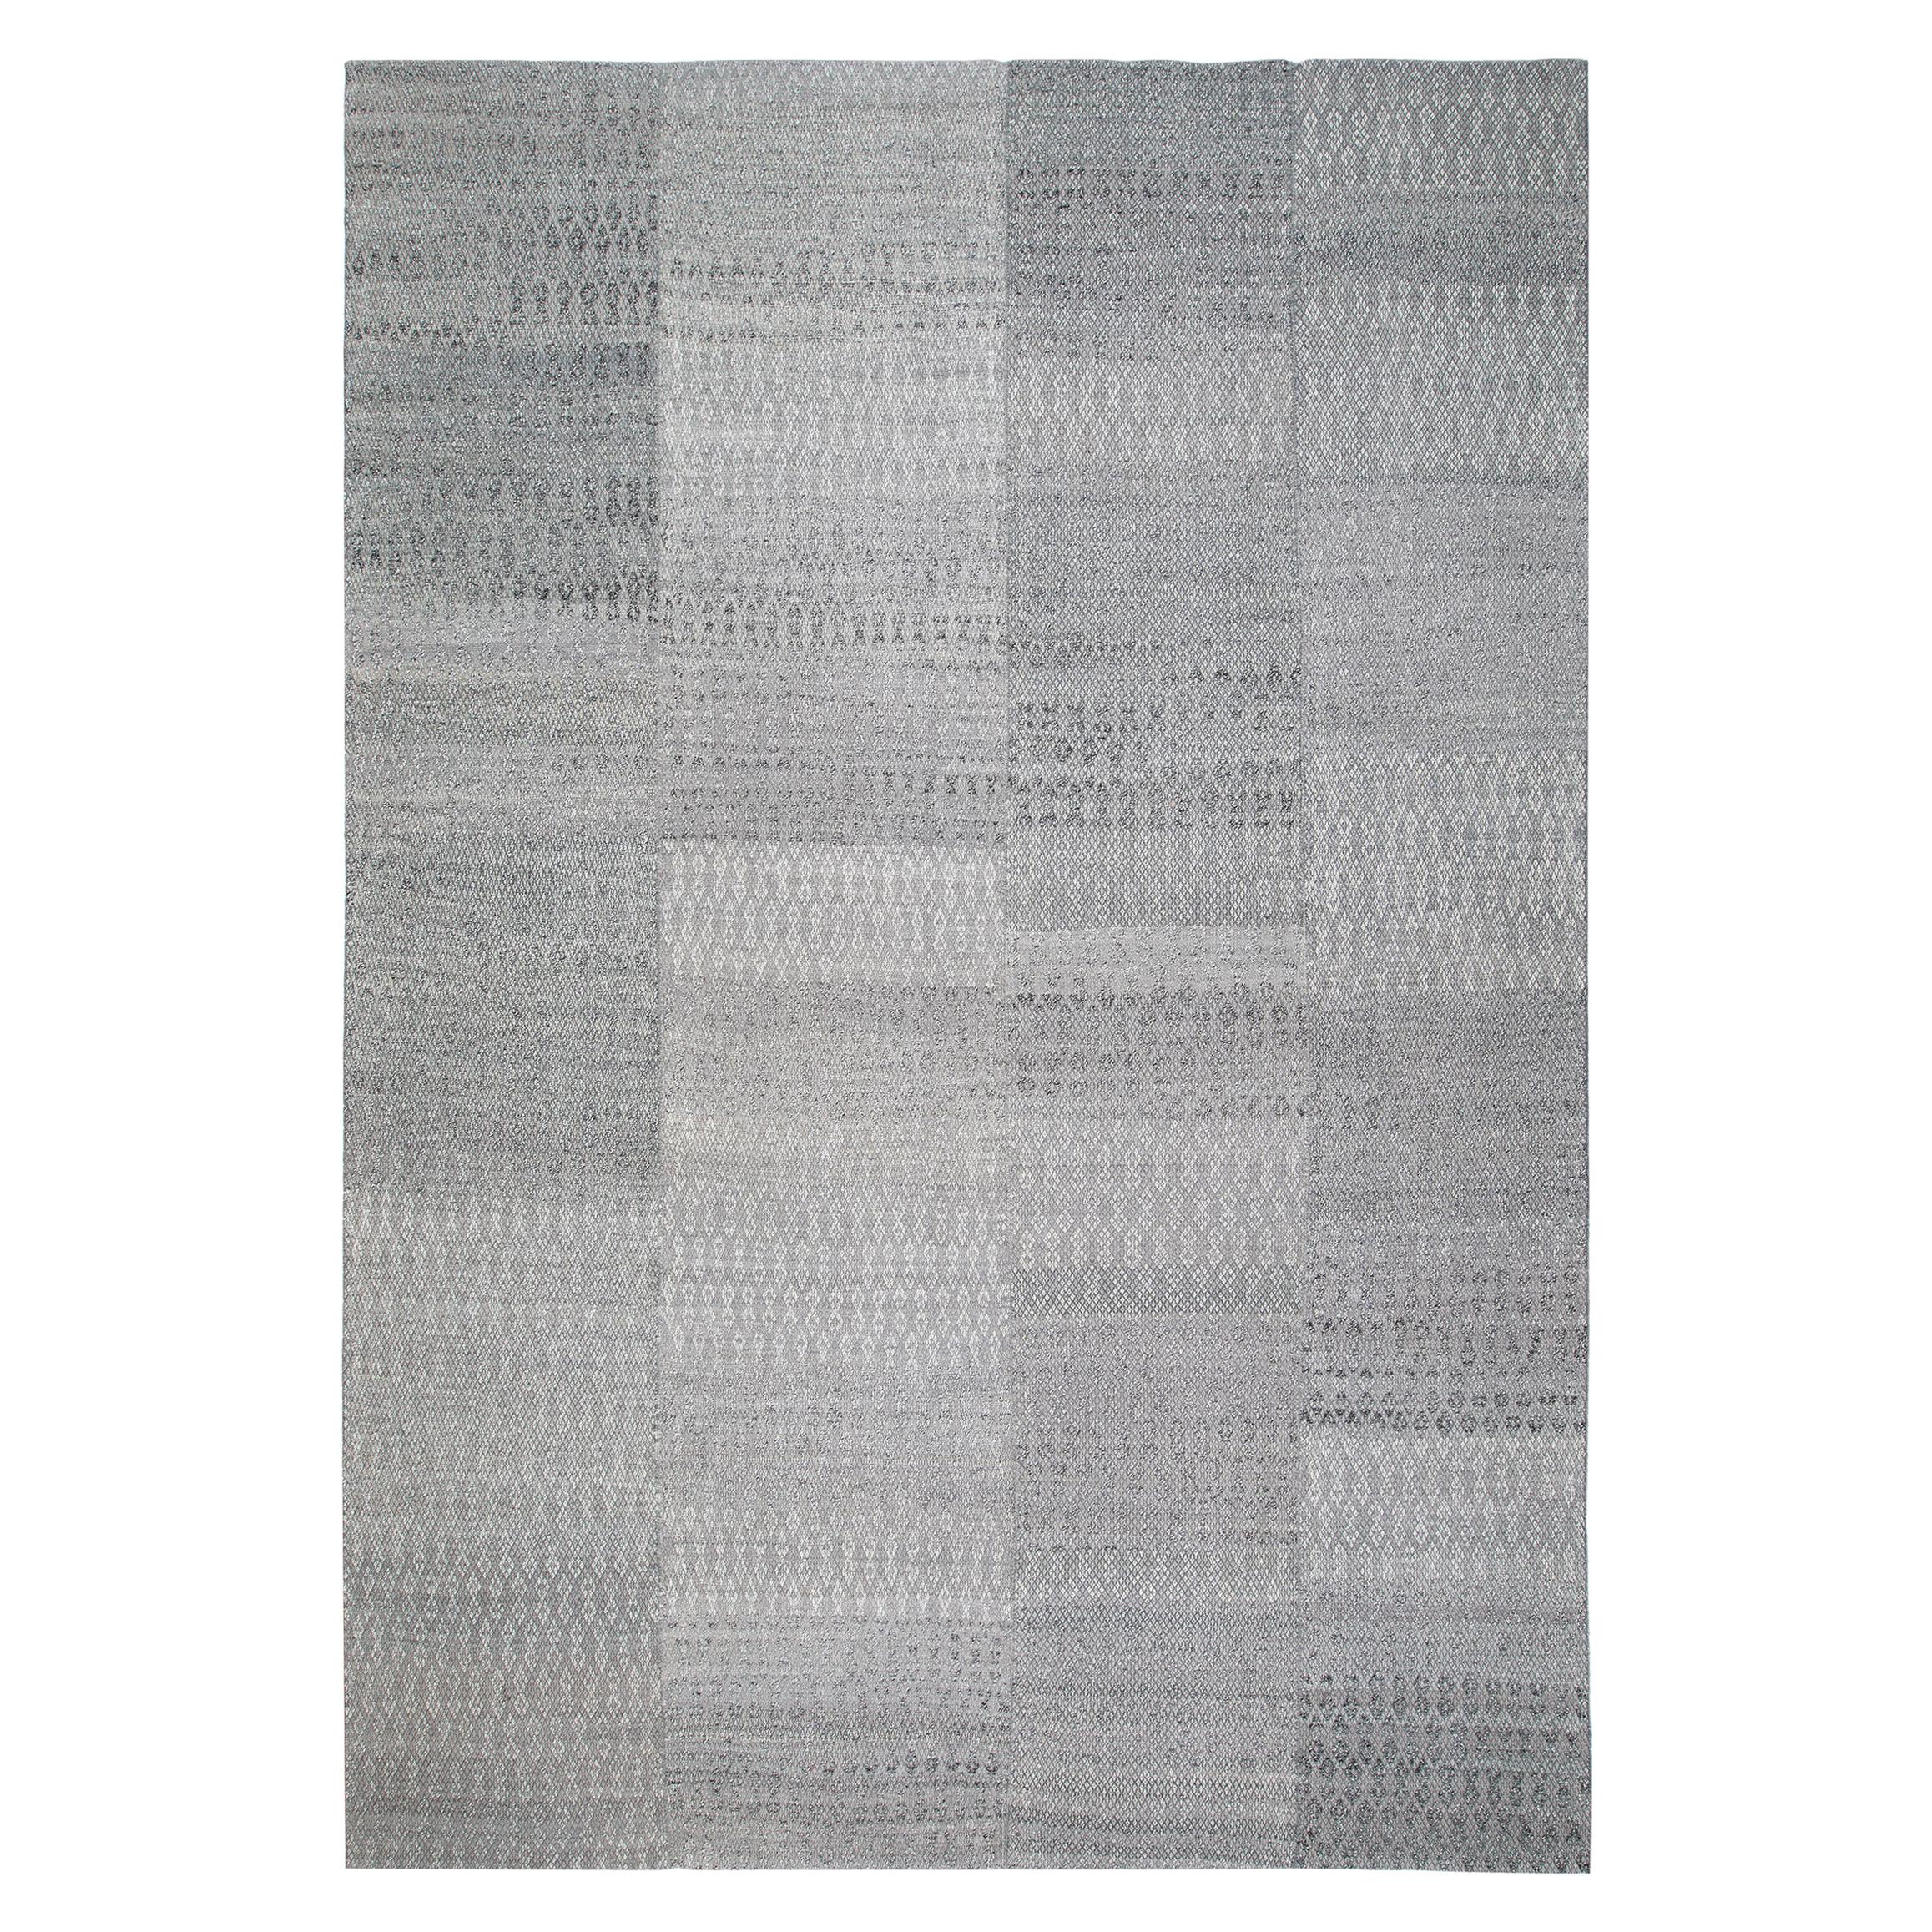 Decorative Modern Flat-Weave Rug in Textured Grey Color